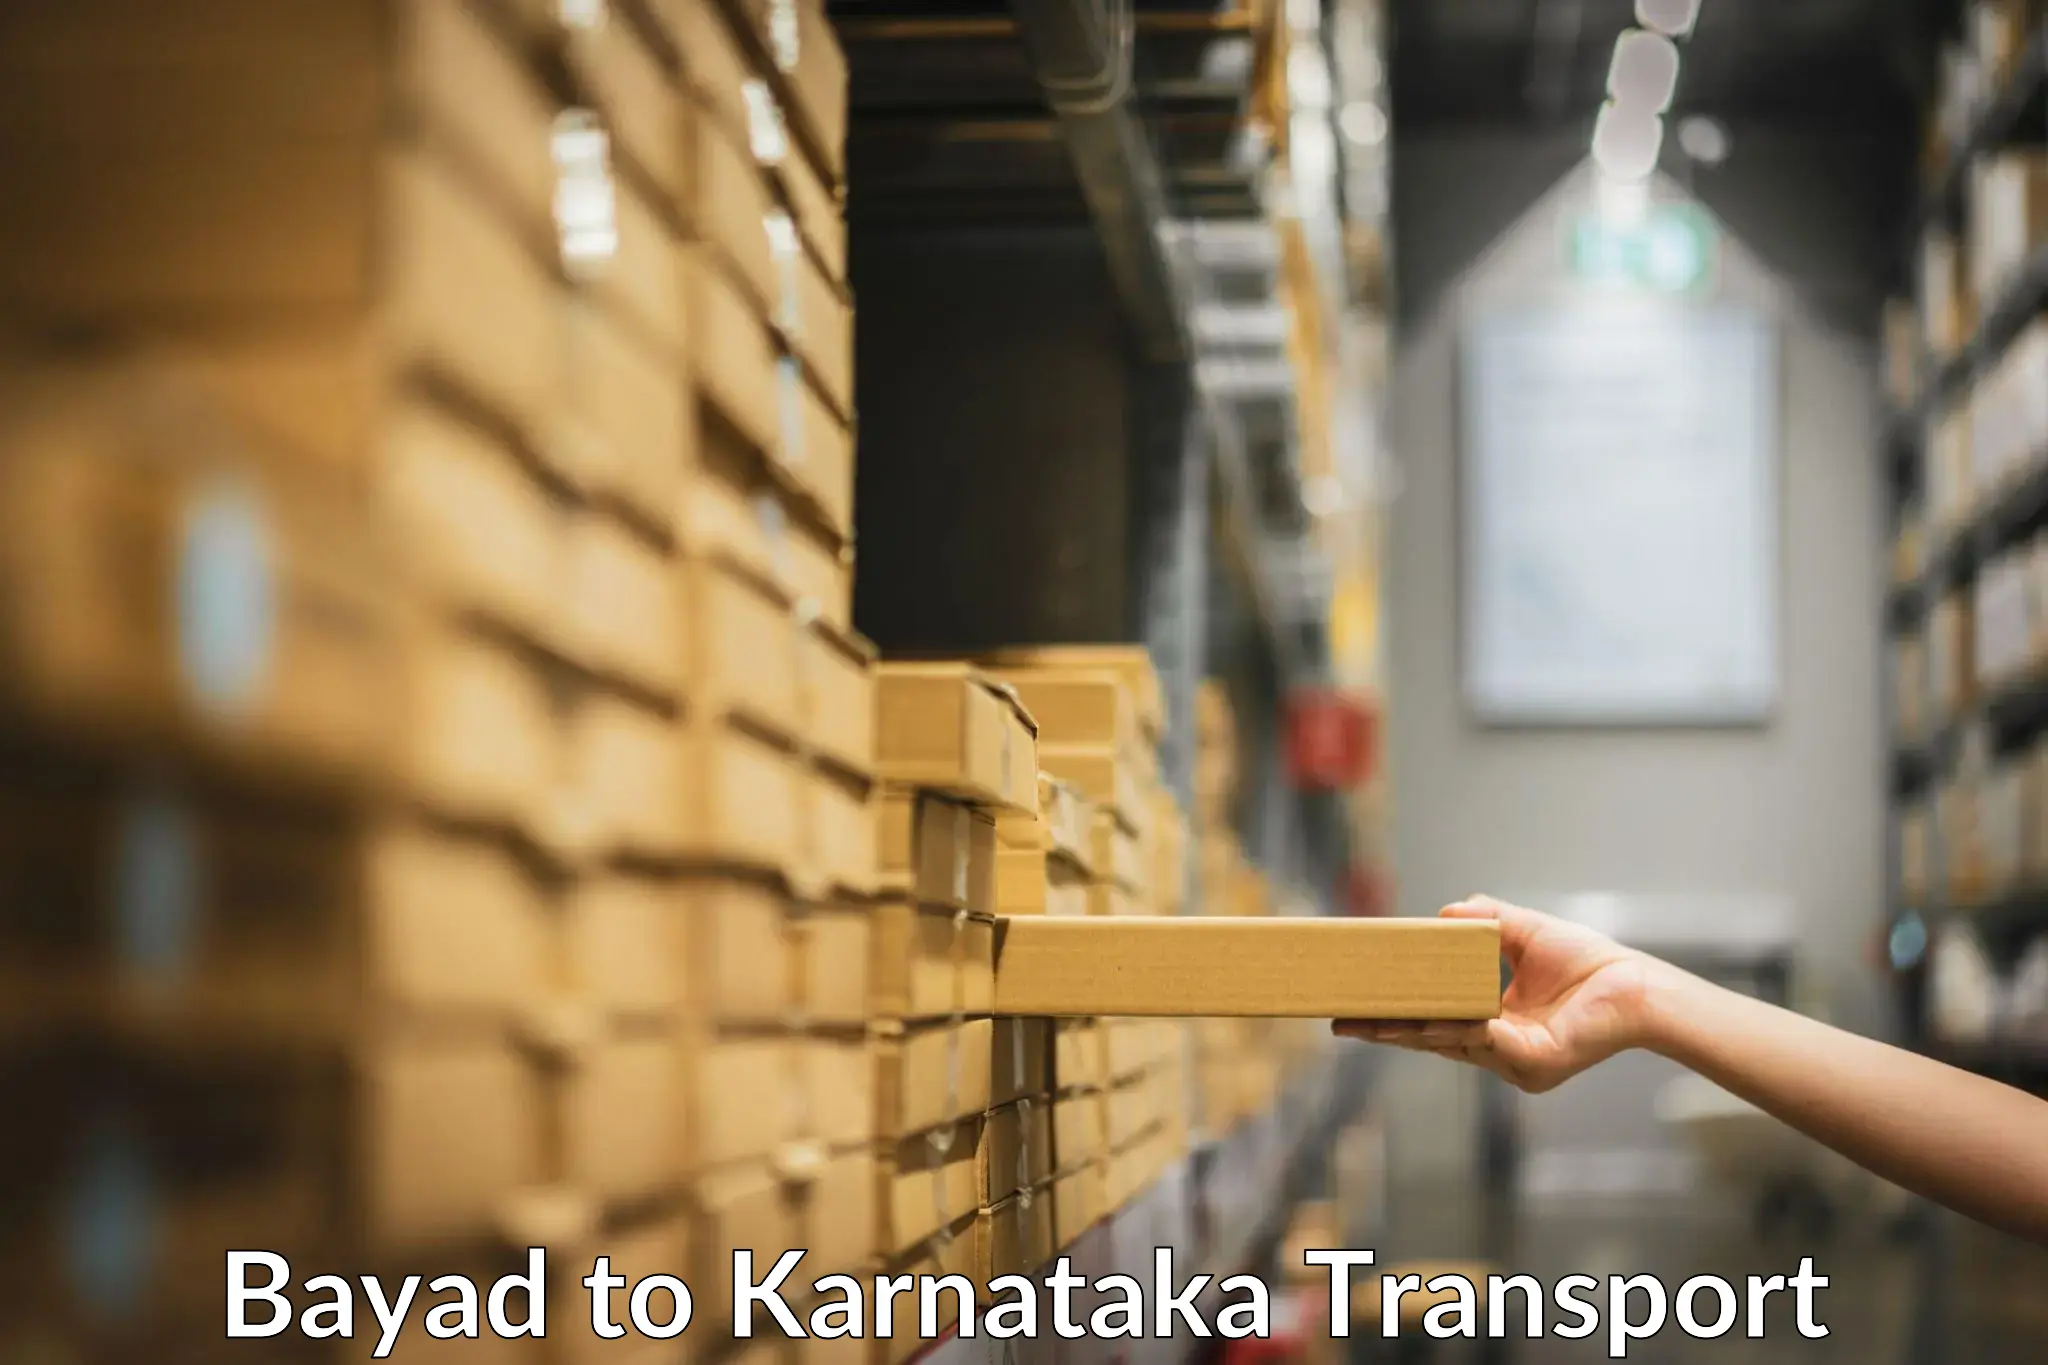 Container transport service Bayad to Pavagada